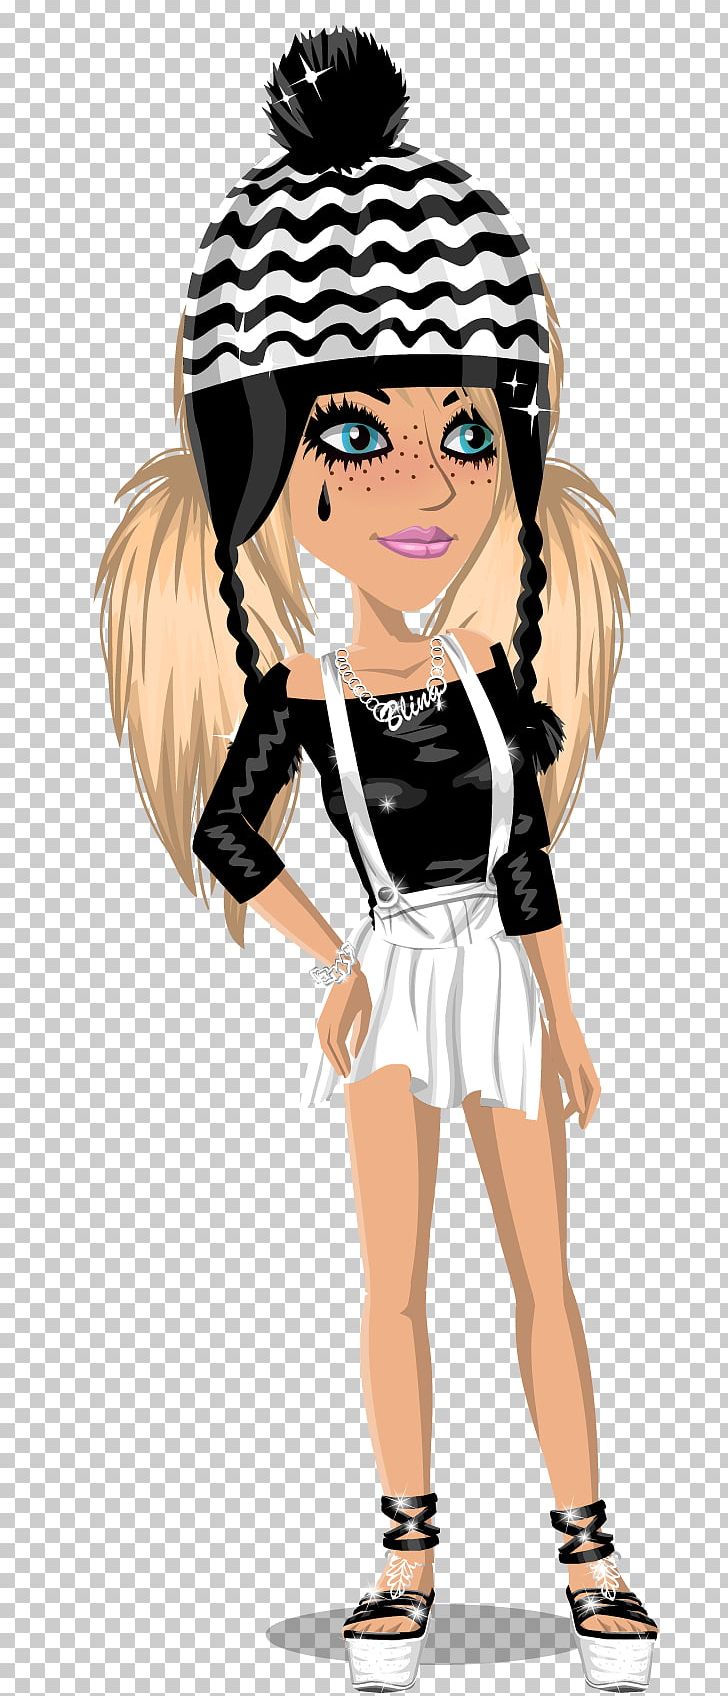 MovieStarPlanet Wiki PNG, Clipart, Anime, Beauty, Black Hair, Brown Hair, Cartoon Free PNG Download